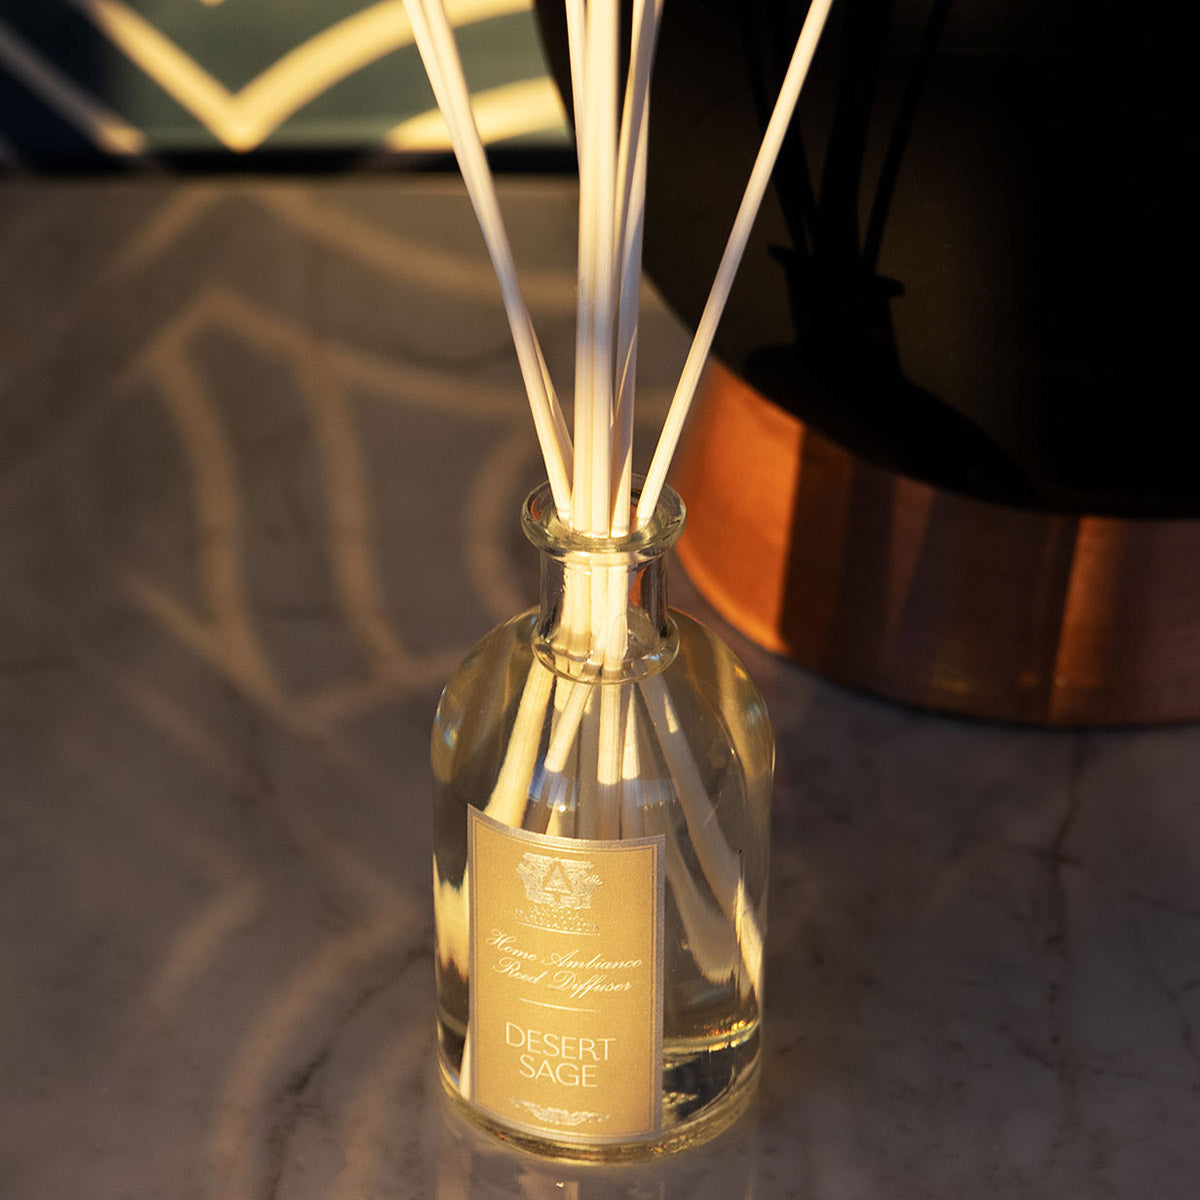 Antica Farmacista Desert Sage Diffuser with Reeds - 250 ml